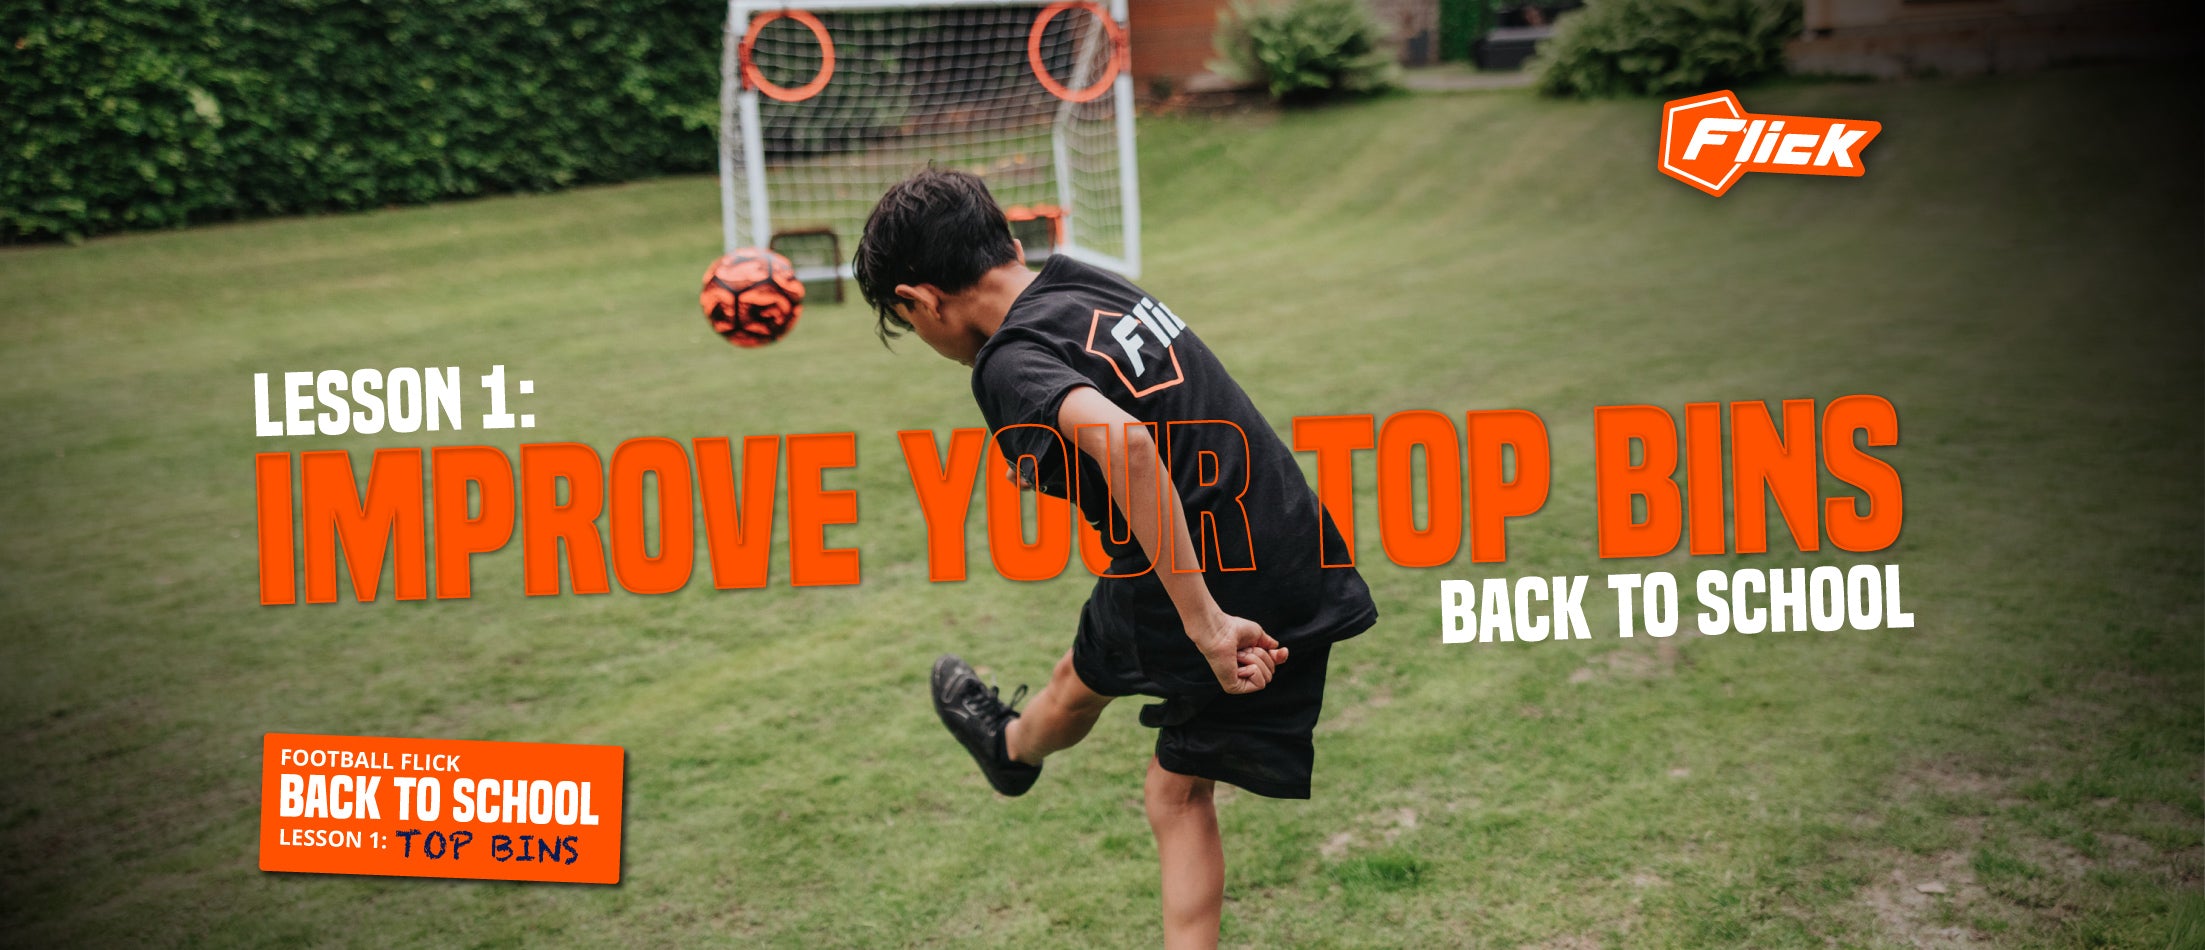 How to improve your Top Bins - Lesson 1 - Back to School